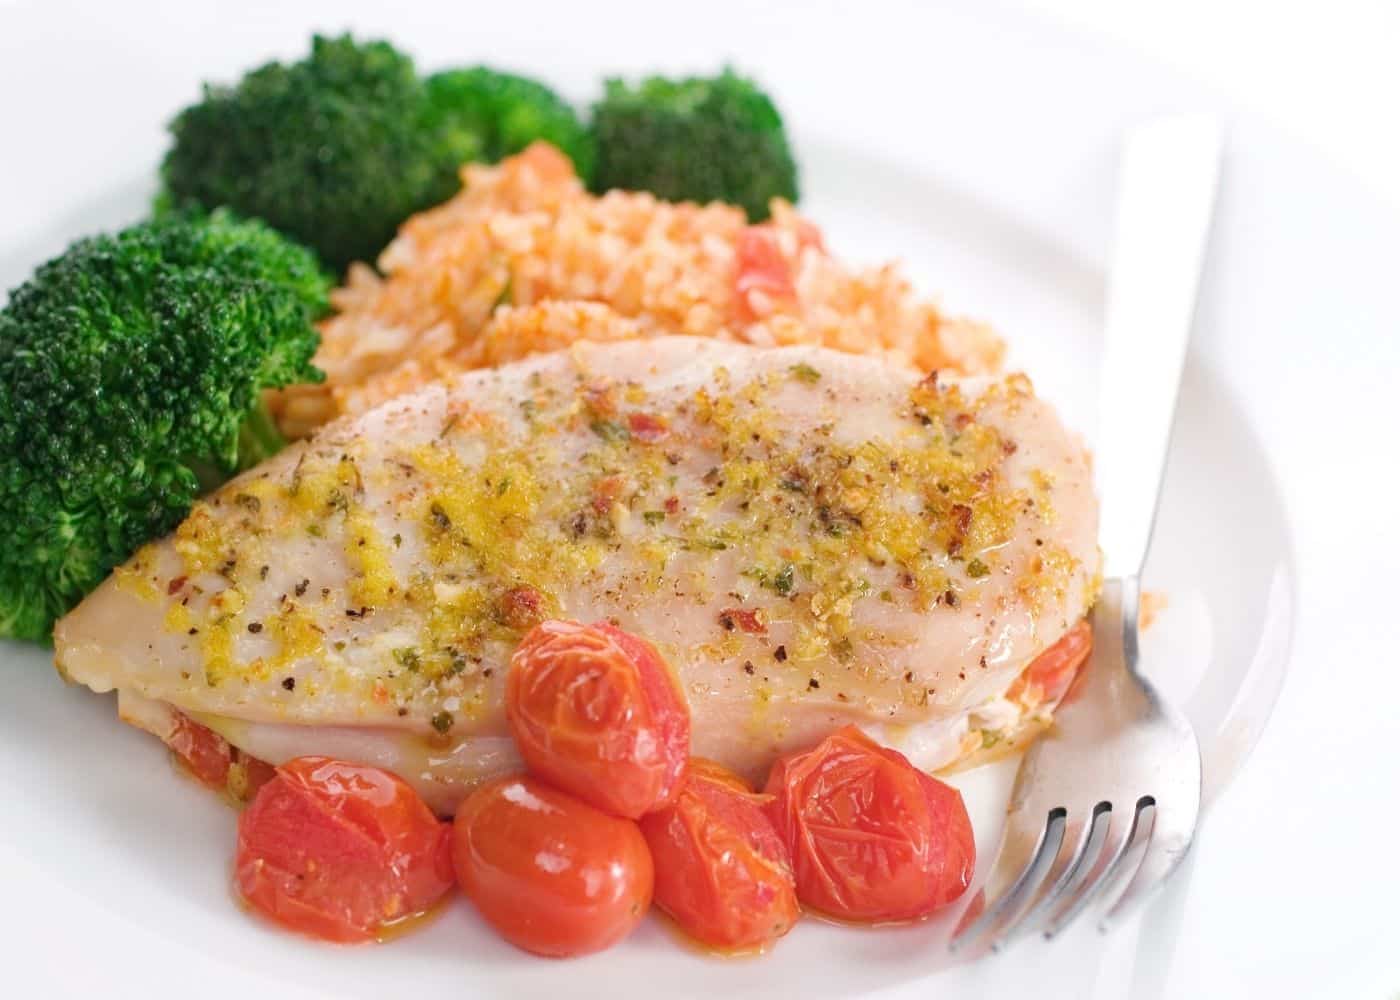 chicken served with broccoli, rice and tomatoes